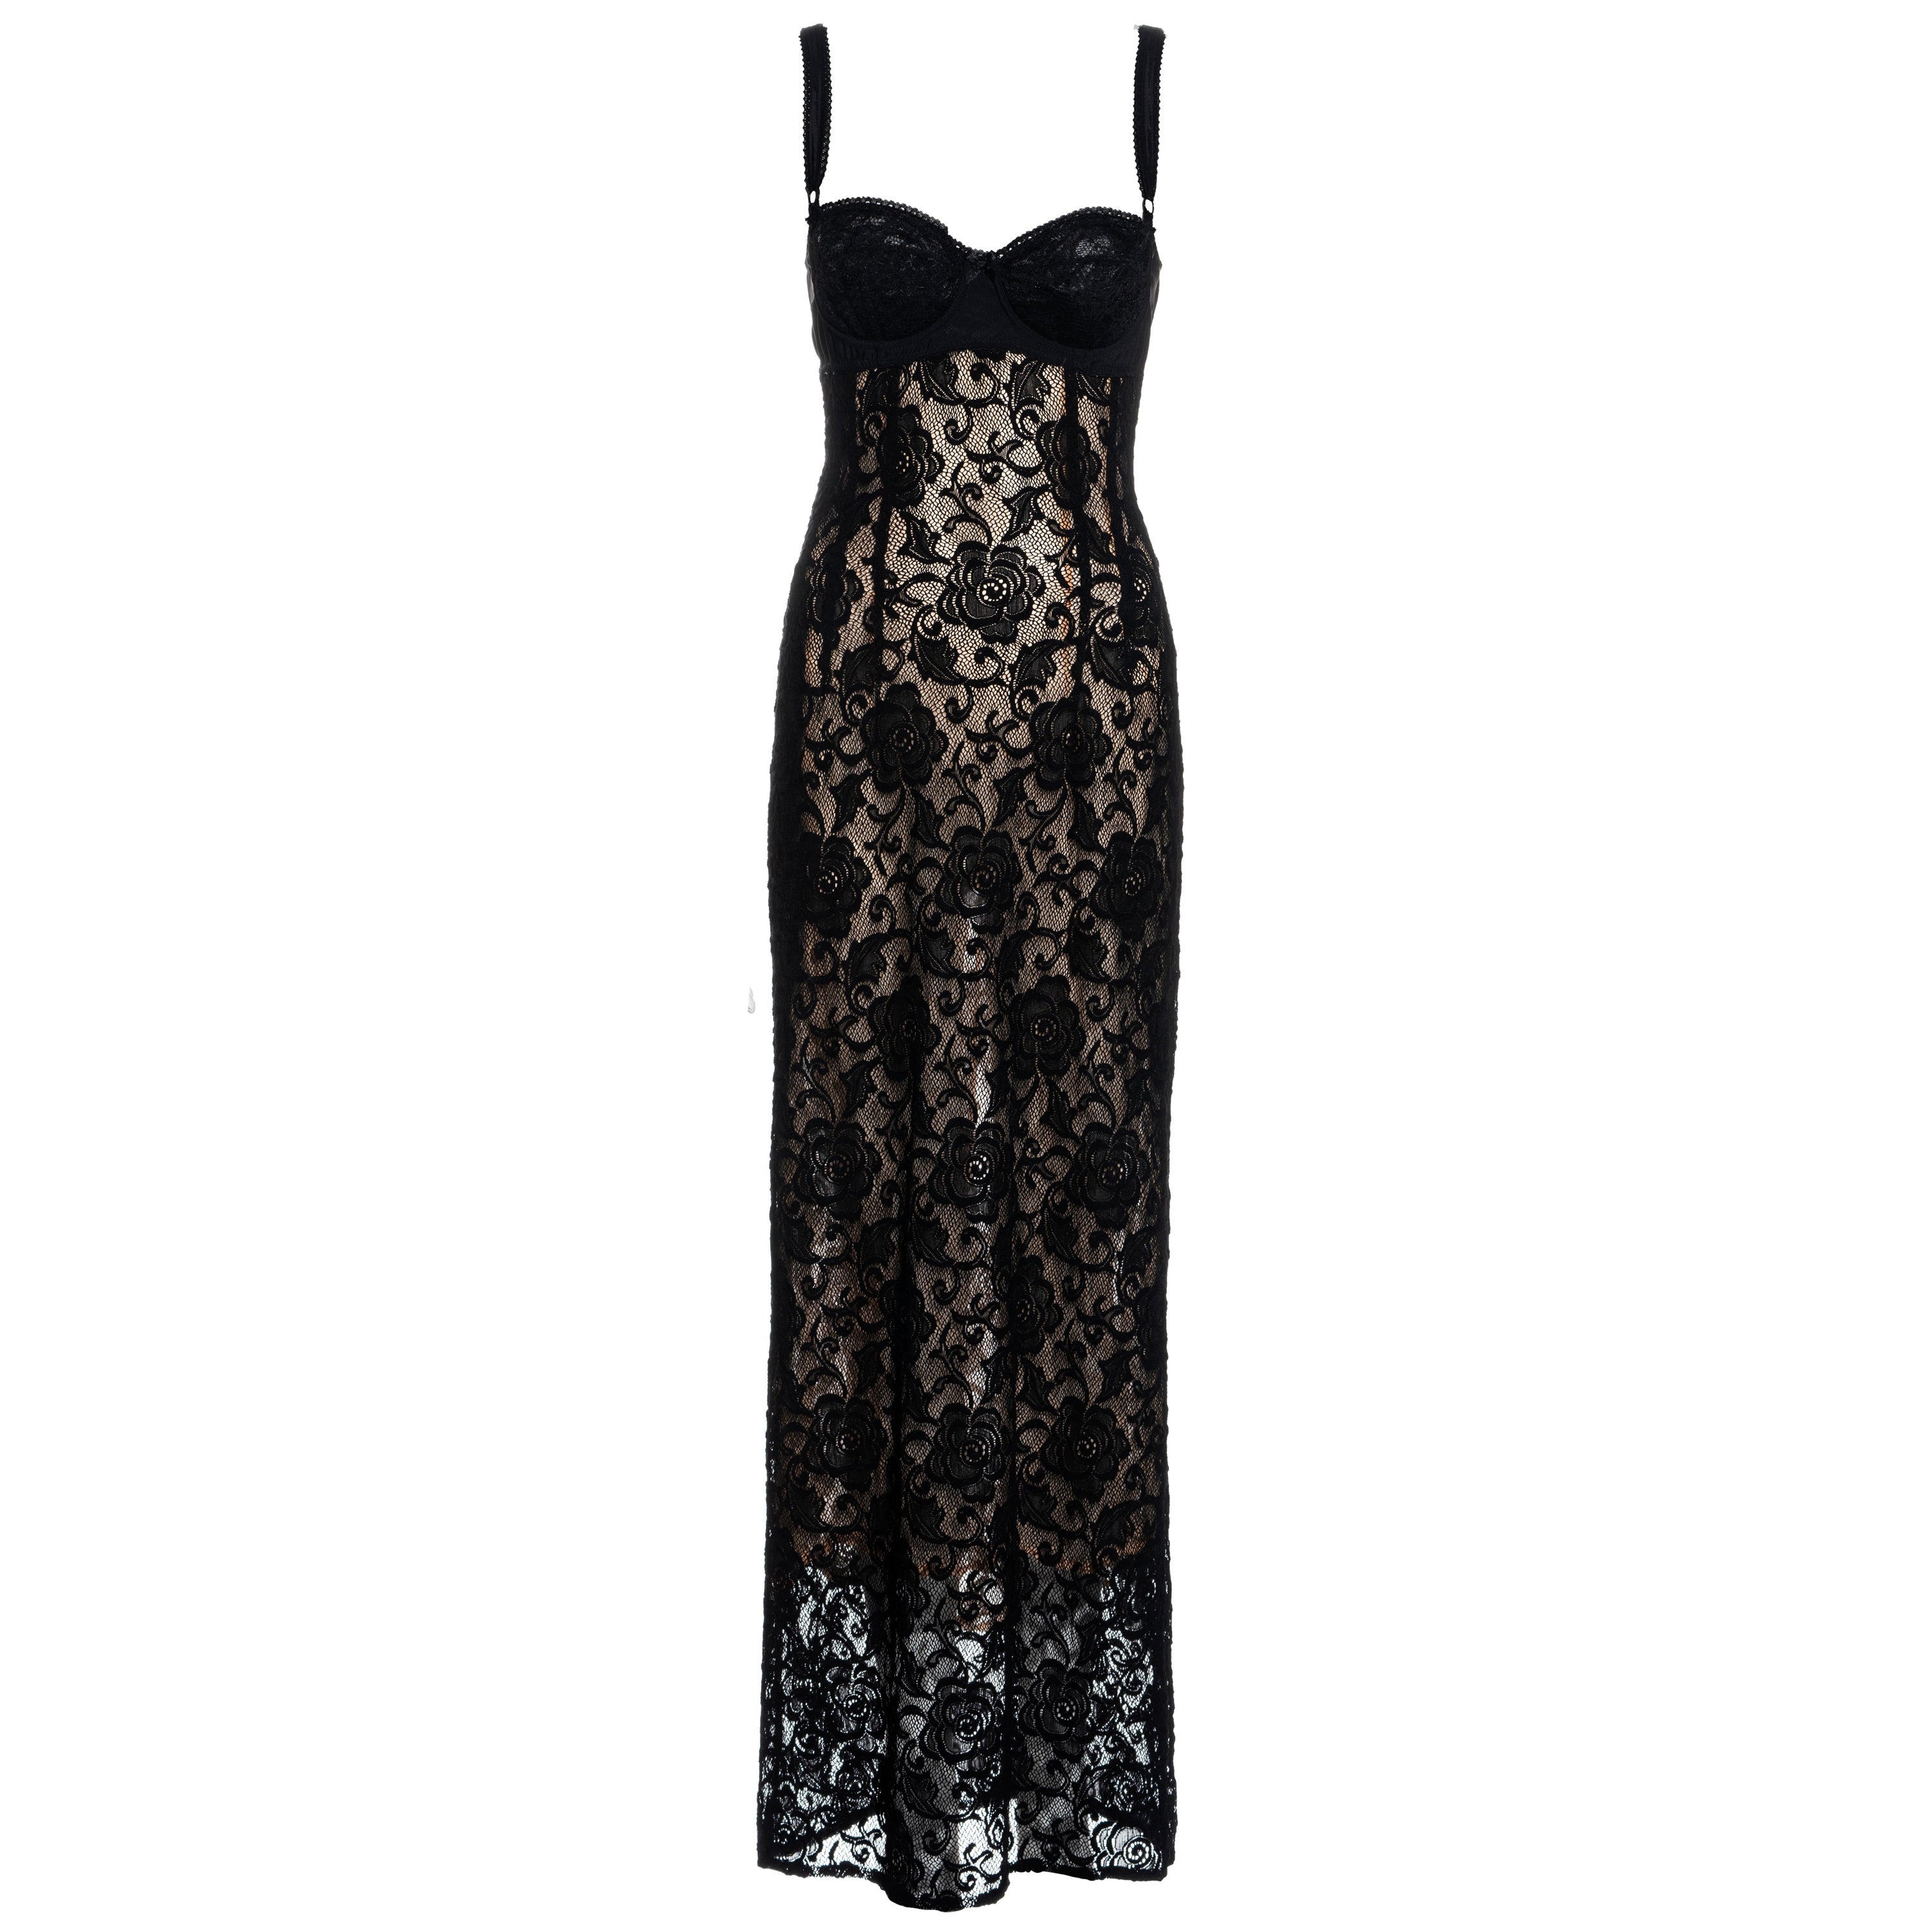 Dolce & Gabbana black lace evening dress with attached bra, ss 1997 For Sale